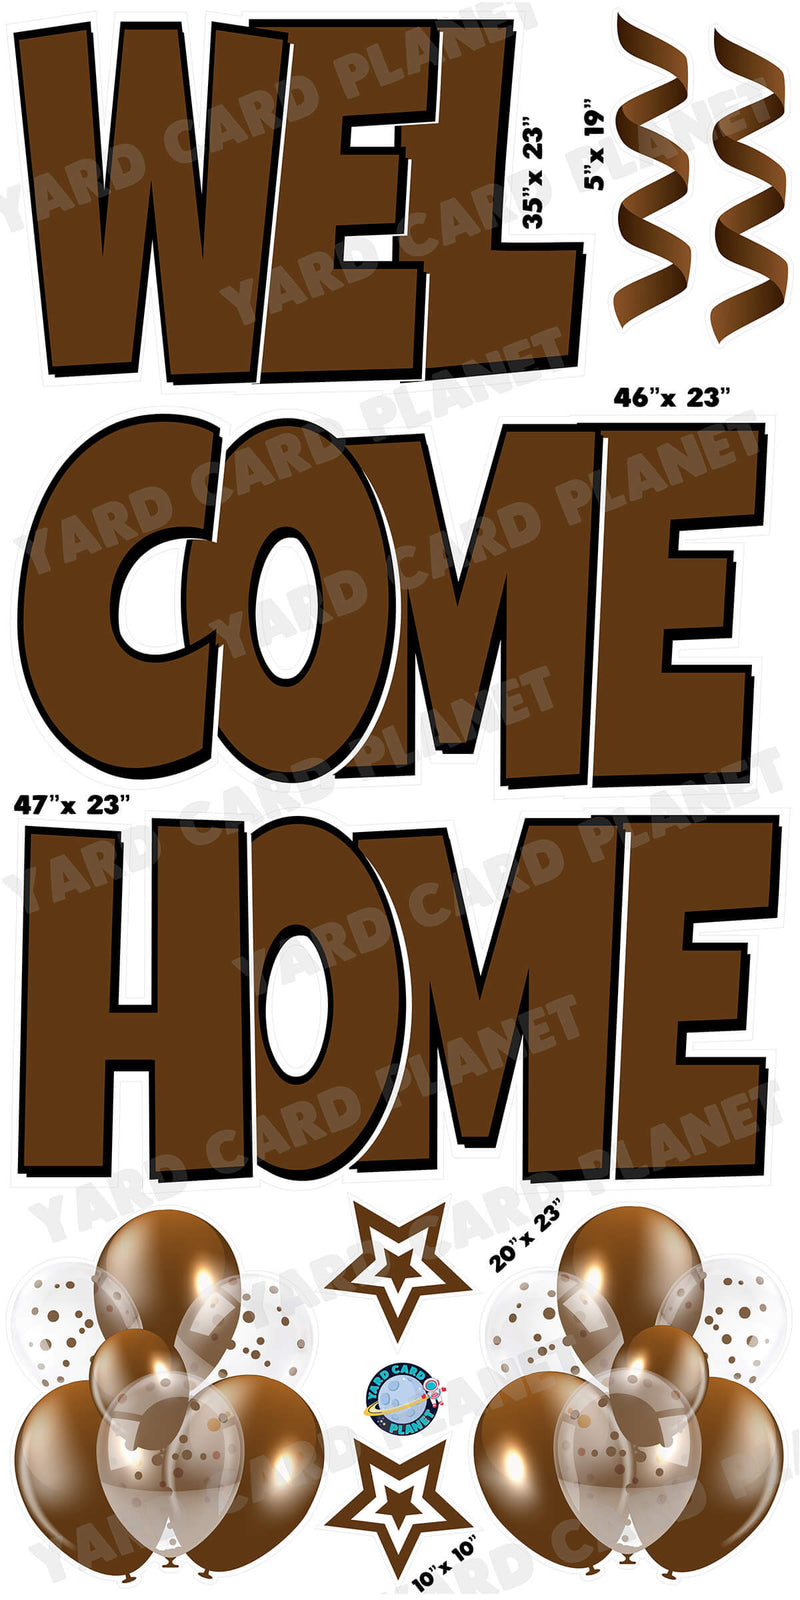 Large 23" Welcome Home Yard Card EZ Quick Sets in Luckiest Guy Font and Flair in Brown Solid Color